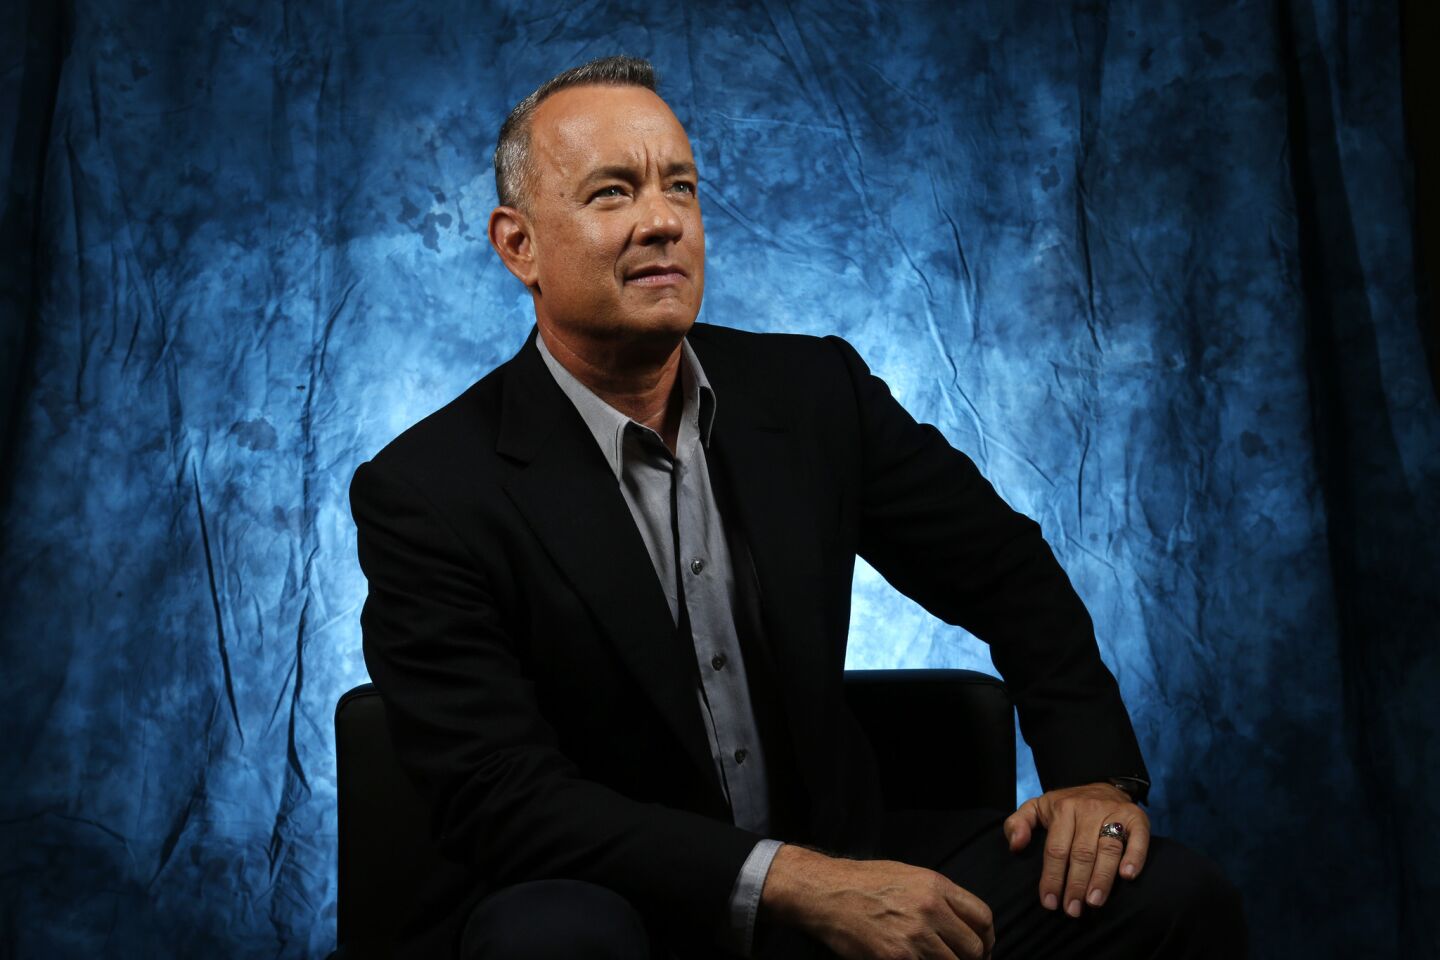 Celebrity portraits by The Times | Tom Hanks